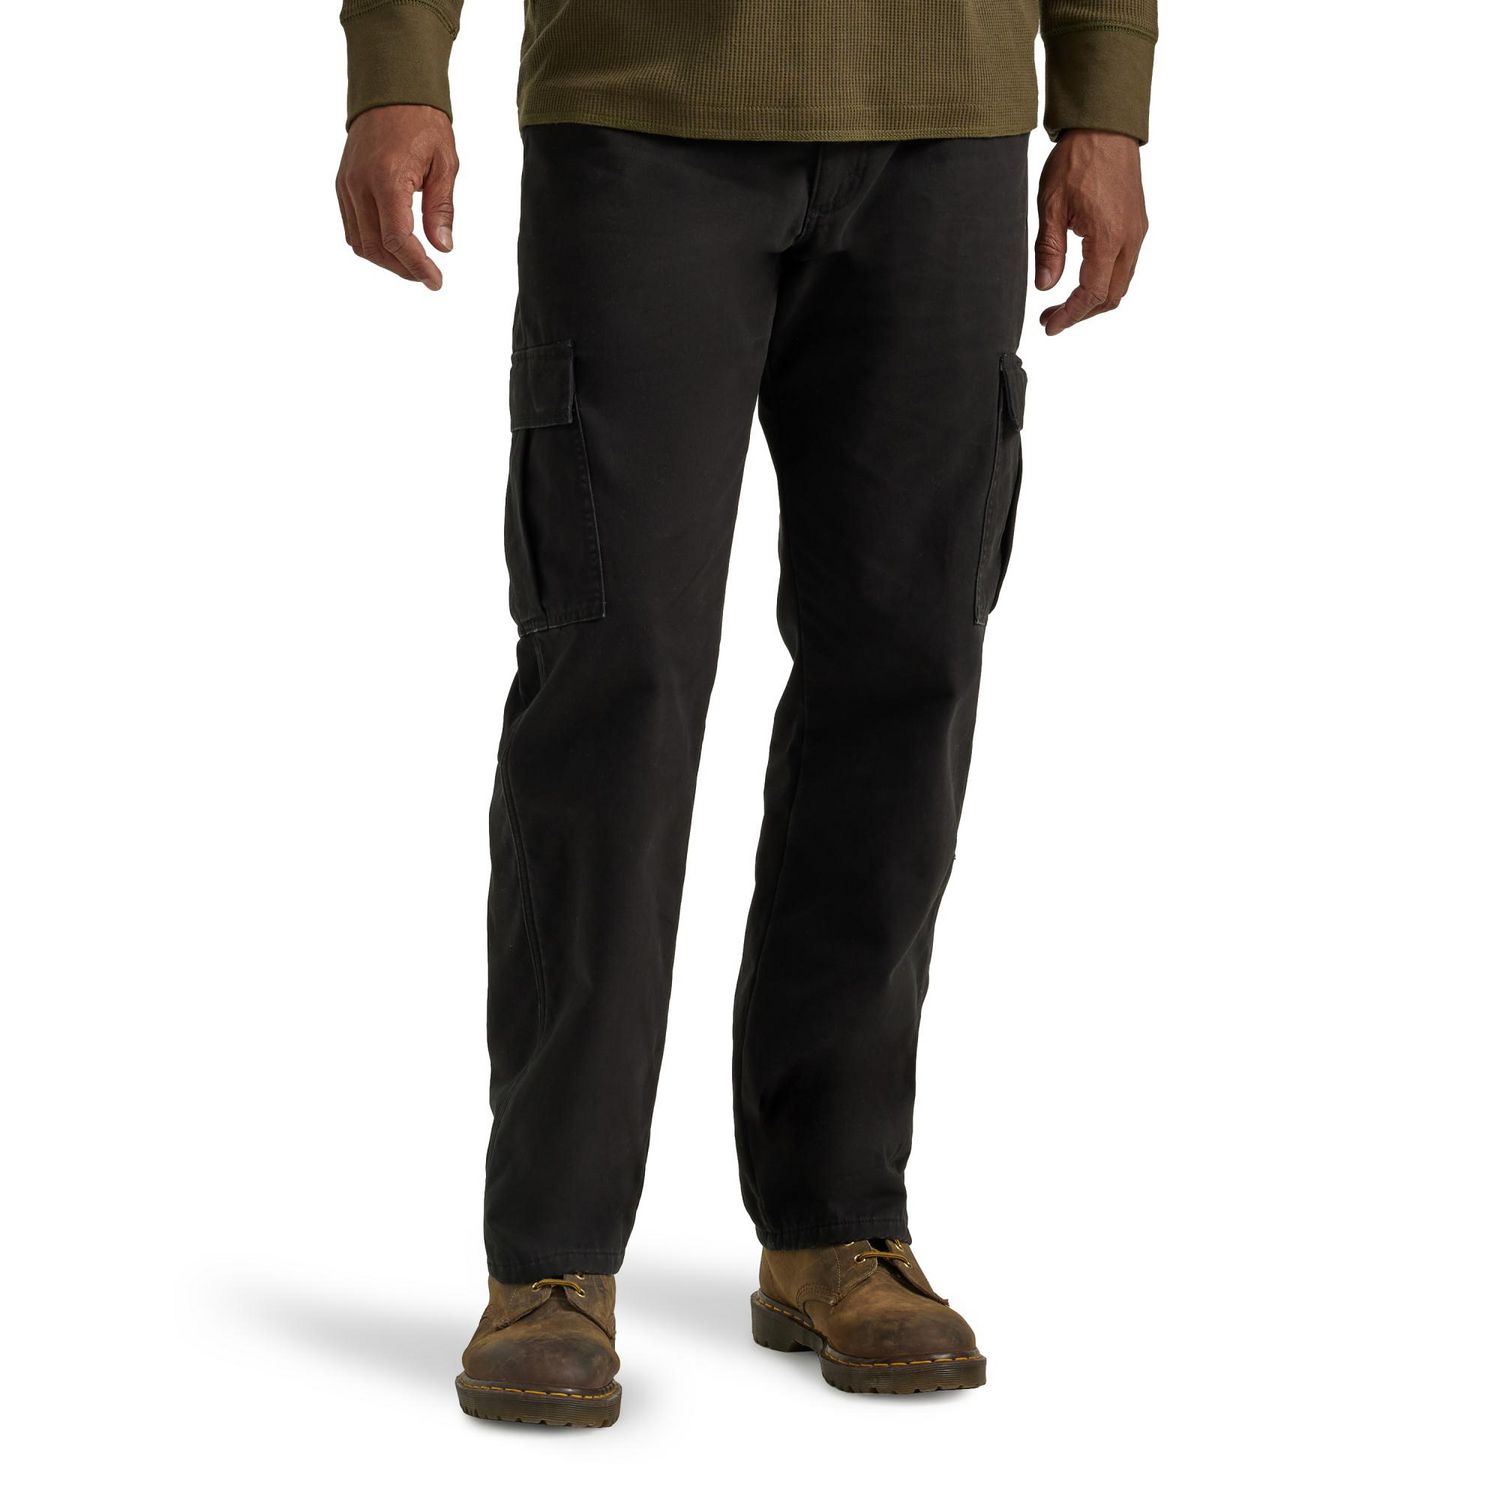 Buy Wrangler Men's Five Star Premium Relaxed FIT Flex Cargo Pants (Olive  Drab Ripstop), Olive Drab, 36W x 32L at Amazon.in